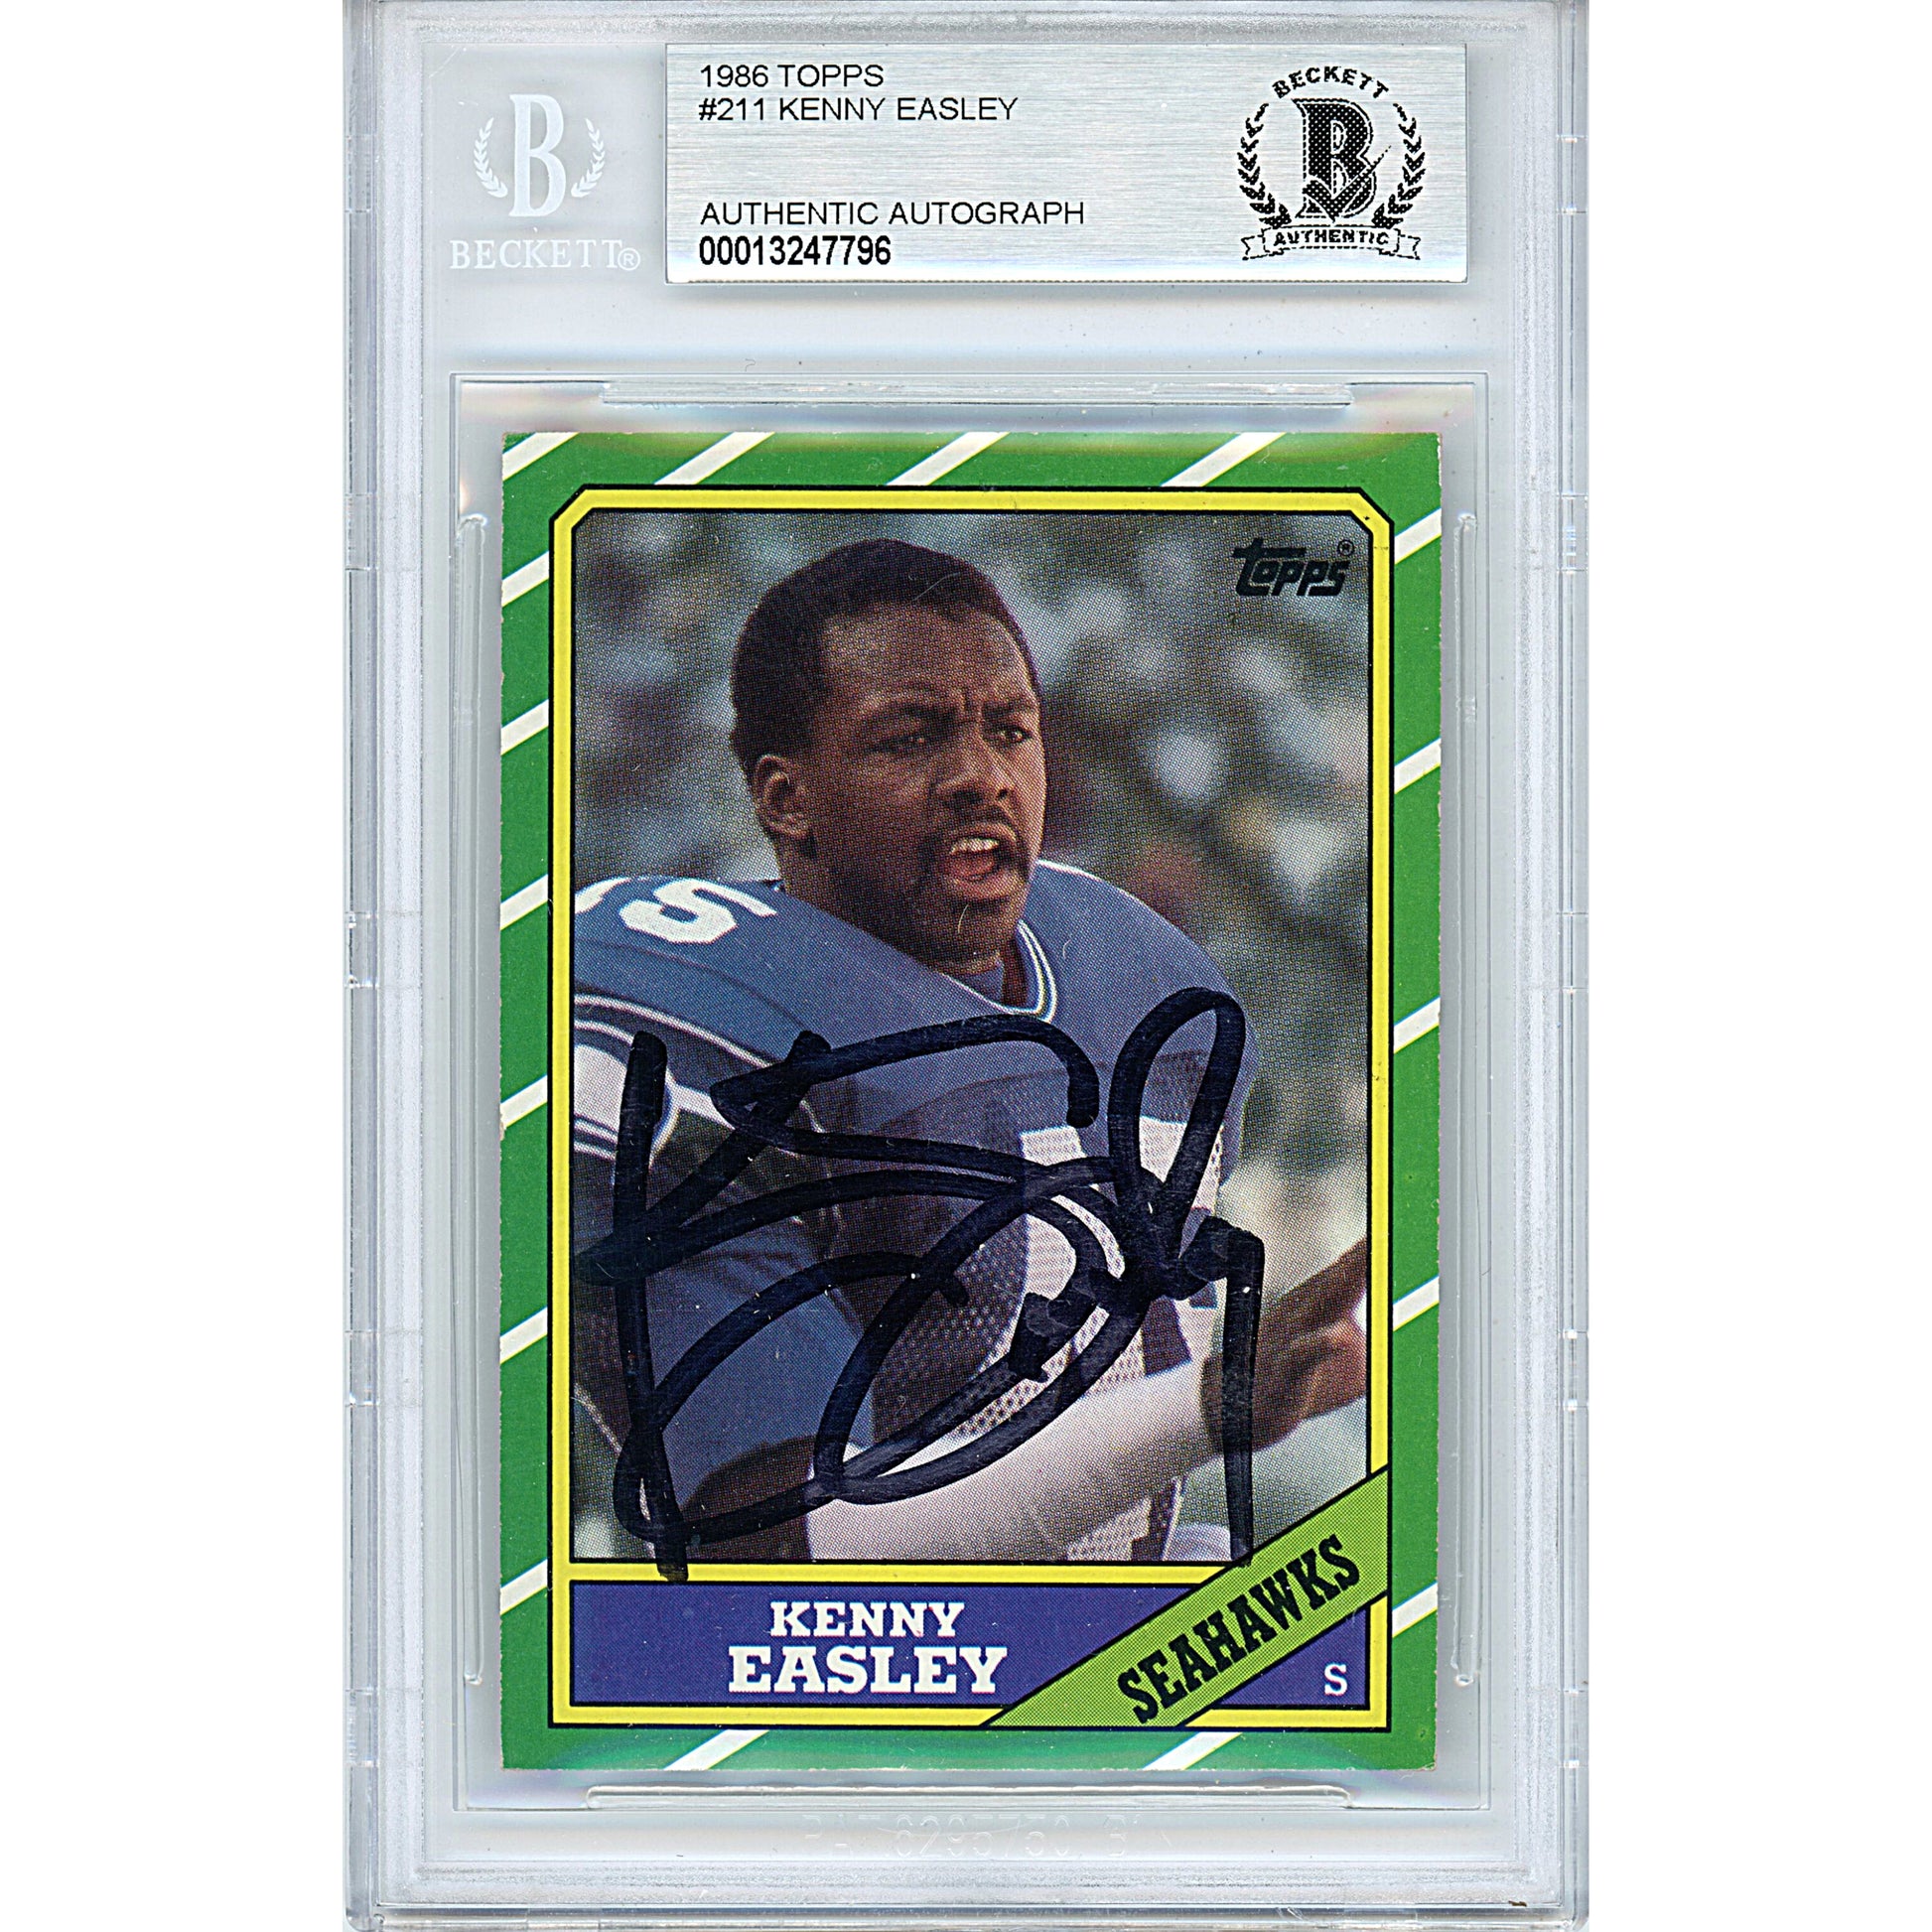 Footballs- Autographed- Kenny Easley Signed Seattle Seahawks 1986 Topps Football Card Beckett BAS Authenticated Slabbed 00013247796 - 101